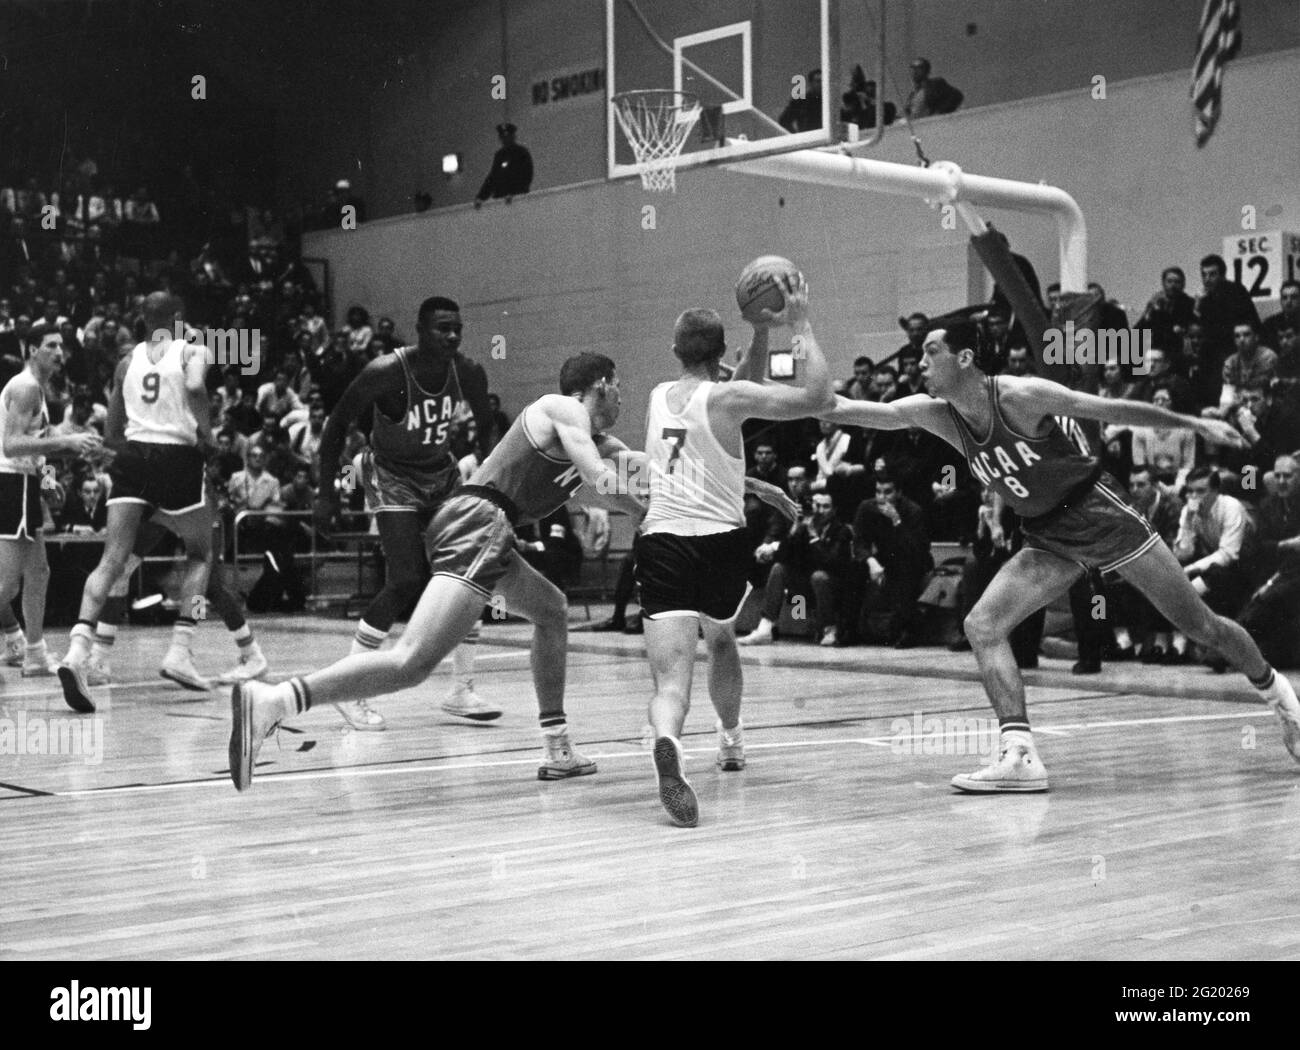 Bill Bradley of Princeton University (#8 for the NCAA 'Red' Team), in action during tryouts for the 1964 US Olympic Basketball team, New York, NY, April 1964. (Photo by Riordan/United States Information Agency/RBM Vintage Images) Stock Photo